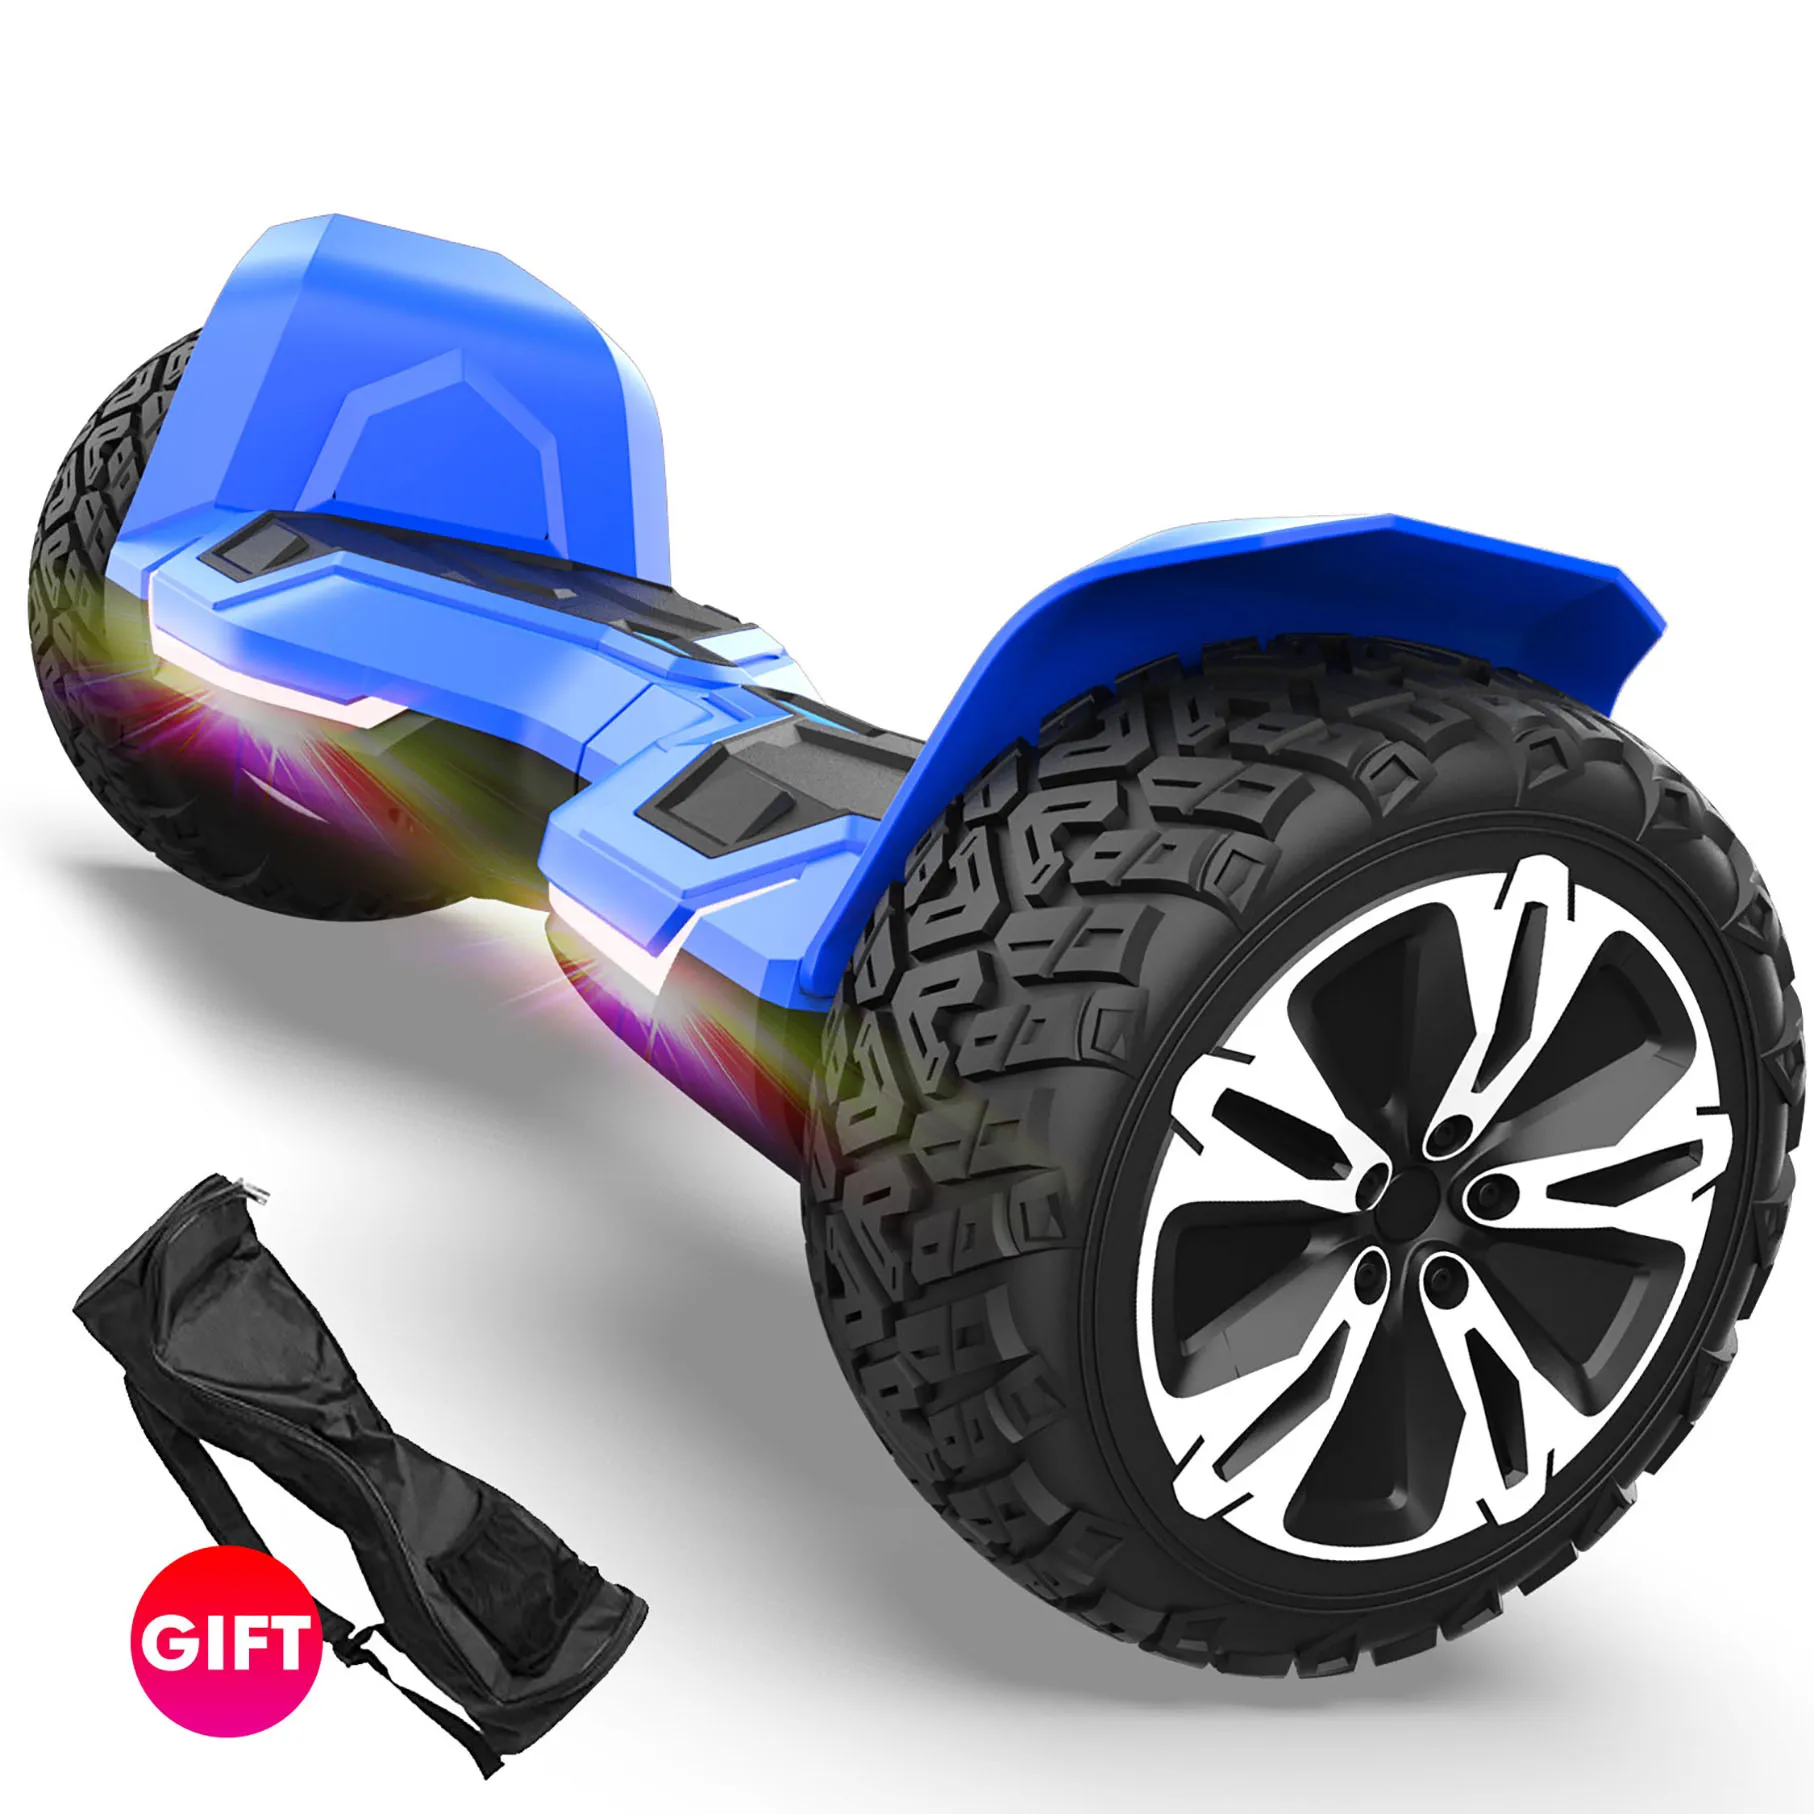 

Gyroor 36V 4Ah 700W motor cheap hover board off road electric scooter hoverboard with APP